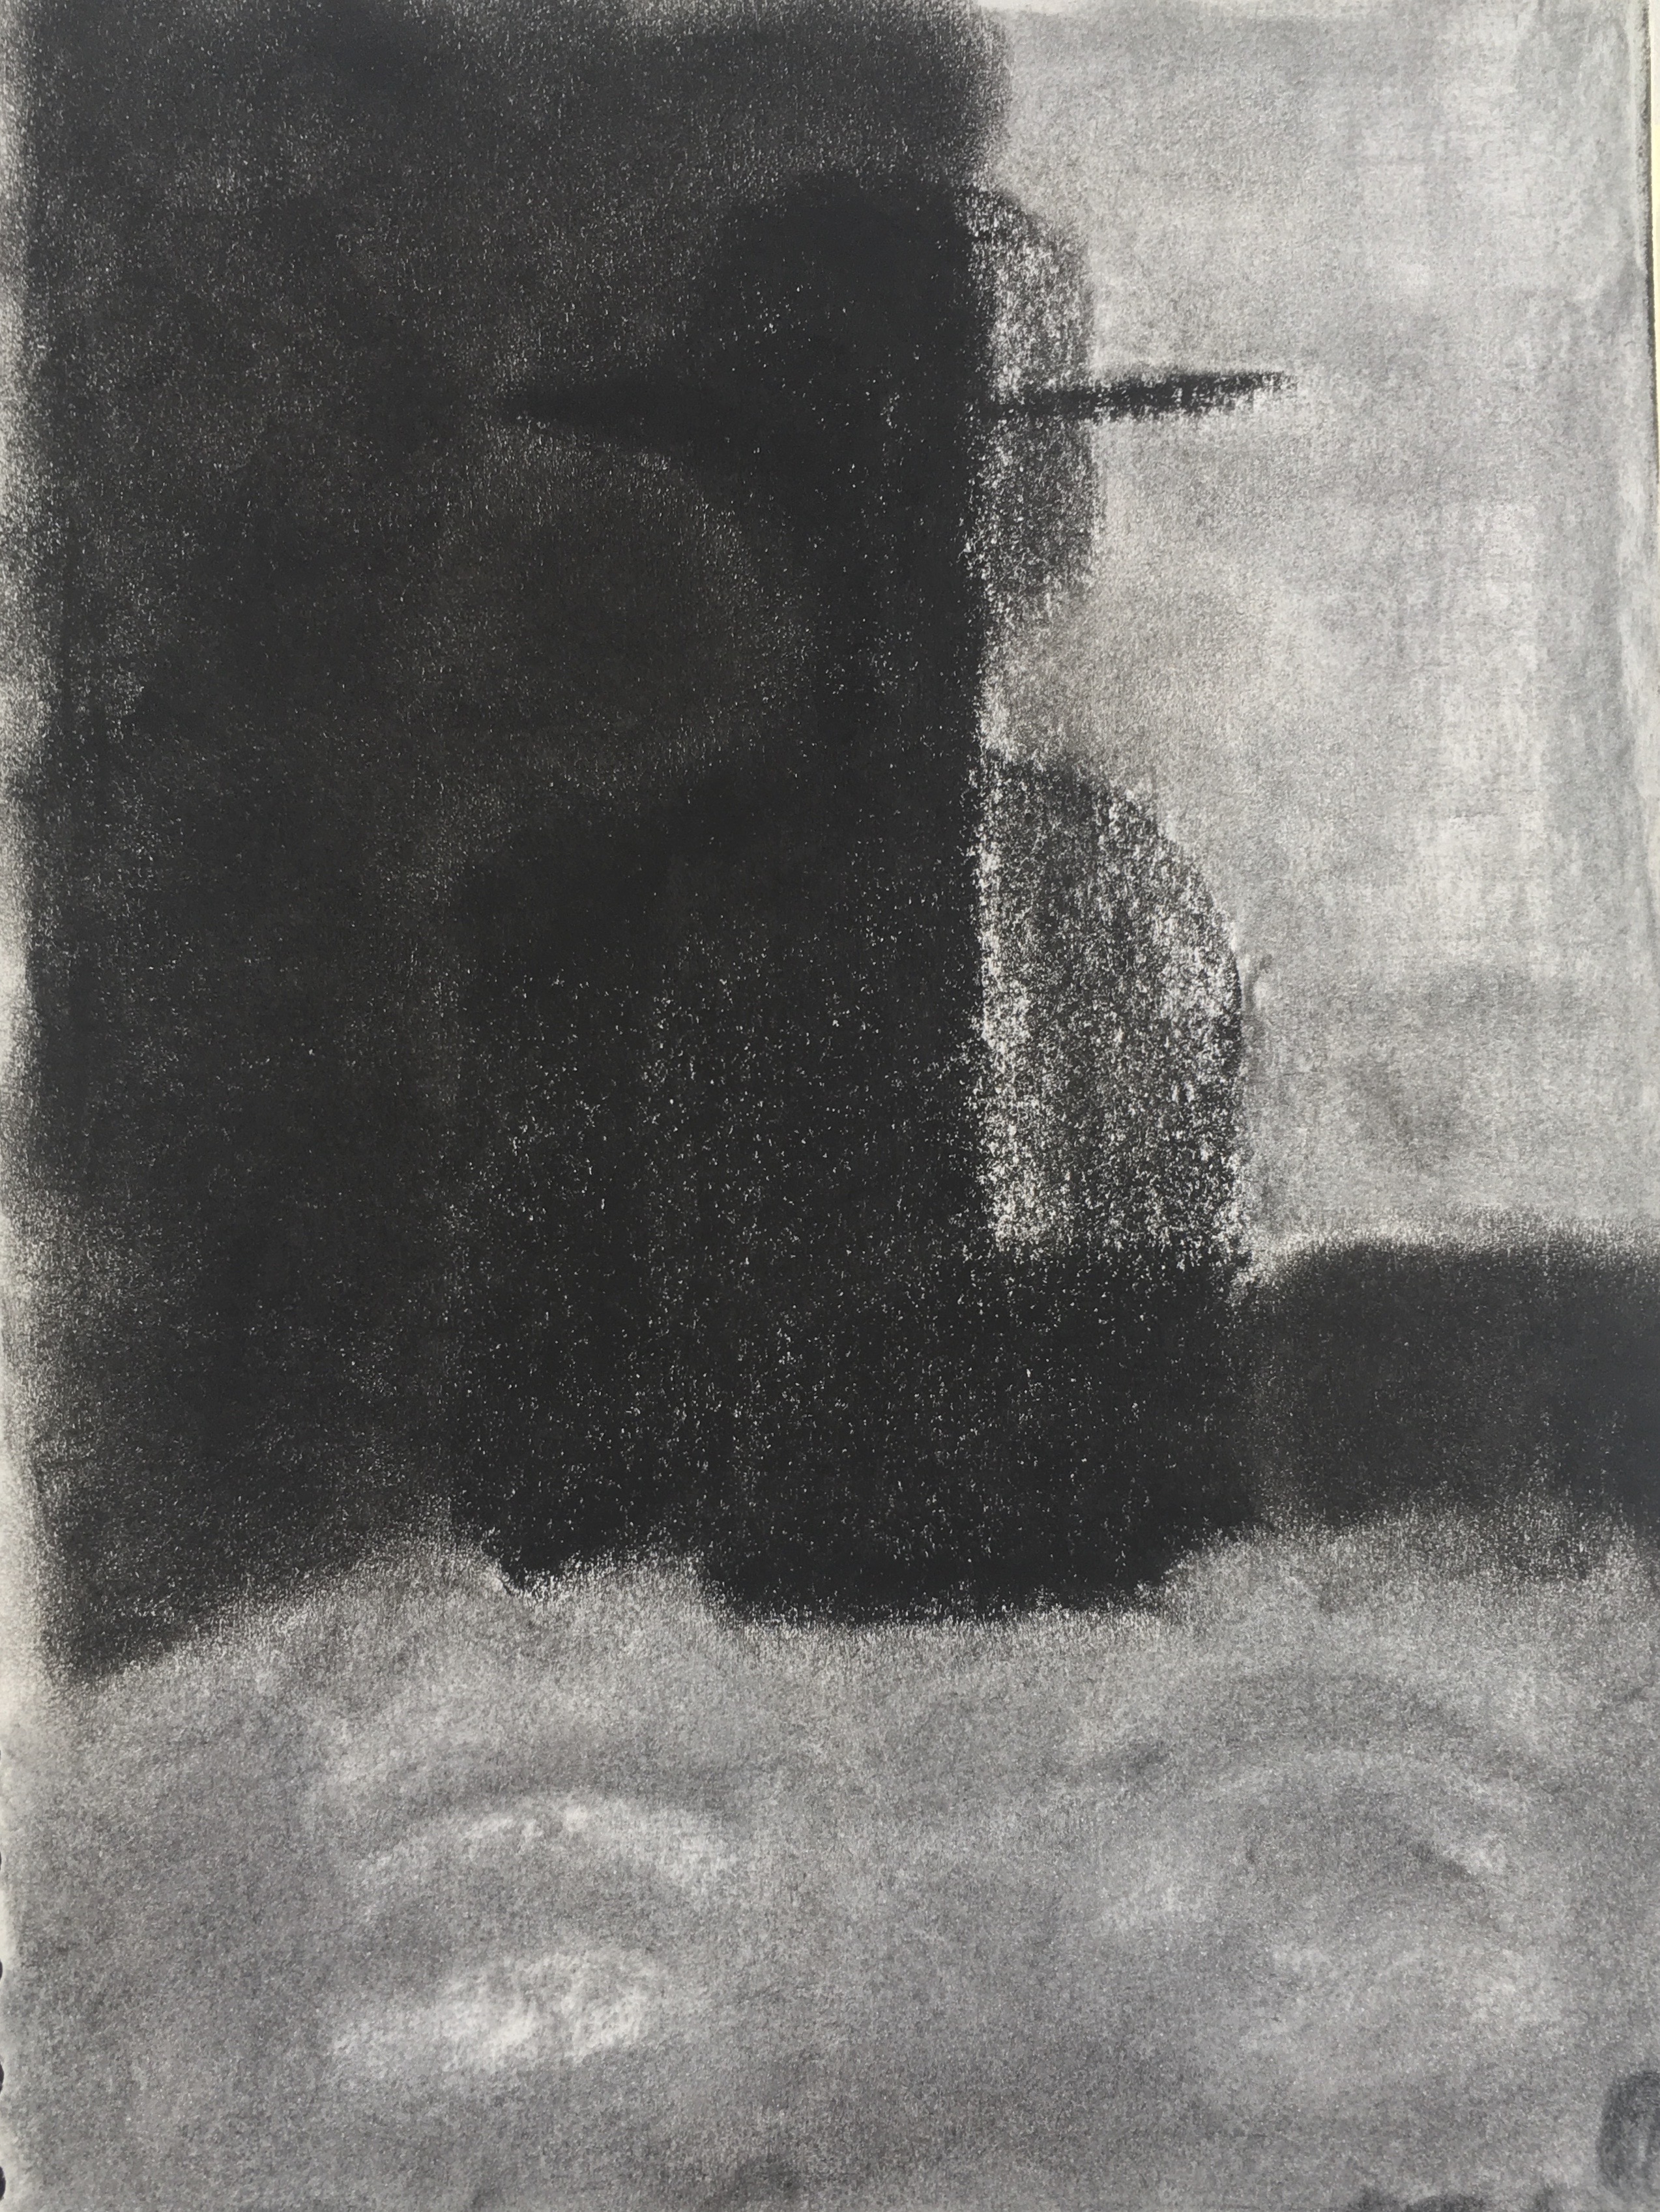 Ghost at the Foot of My Bed, 1990
Charcoal on Paper, Walli White, artist